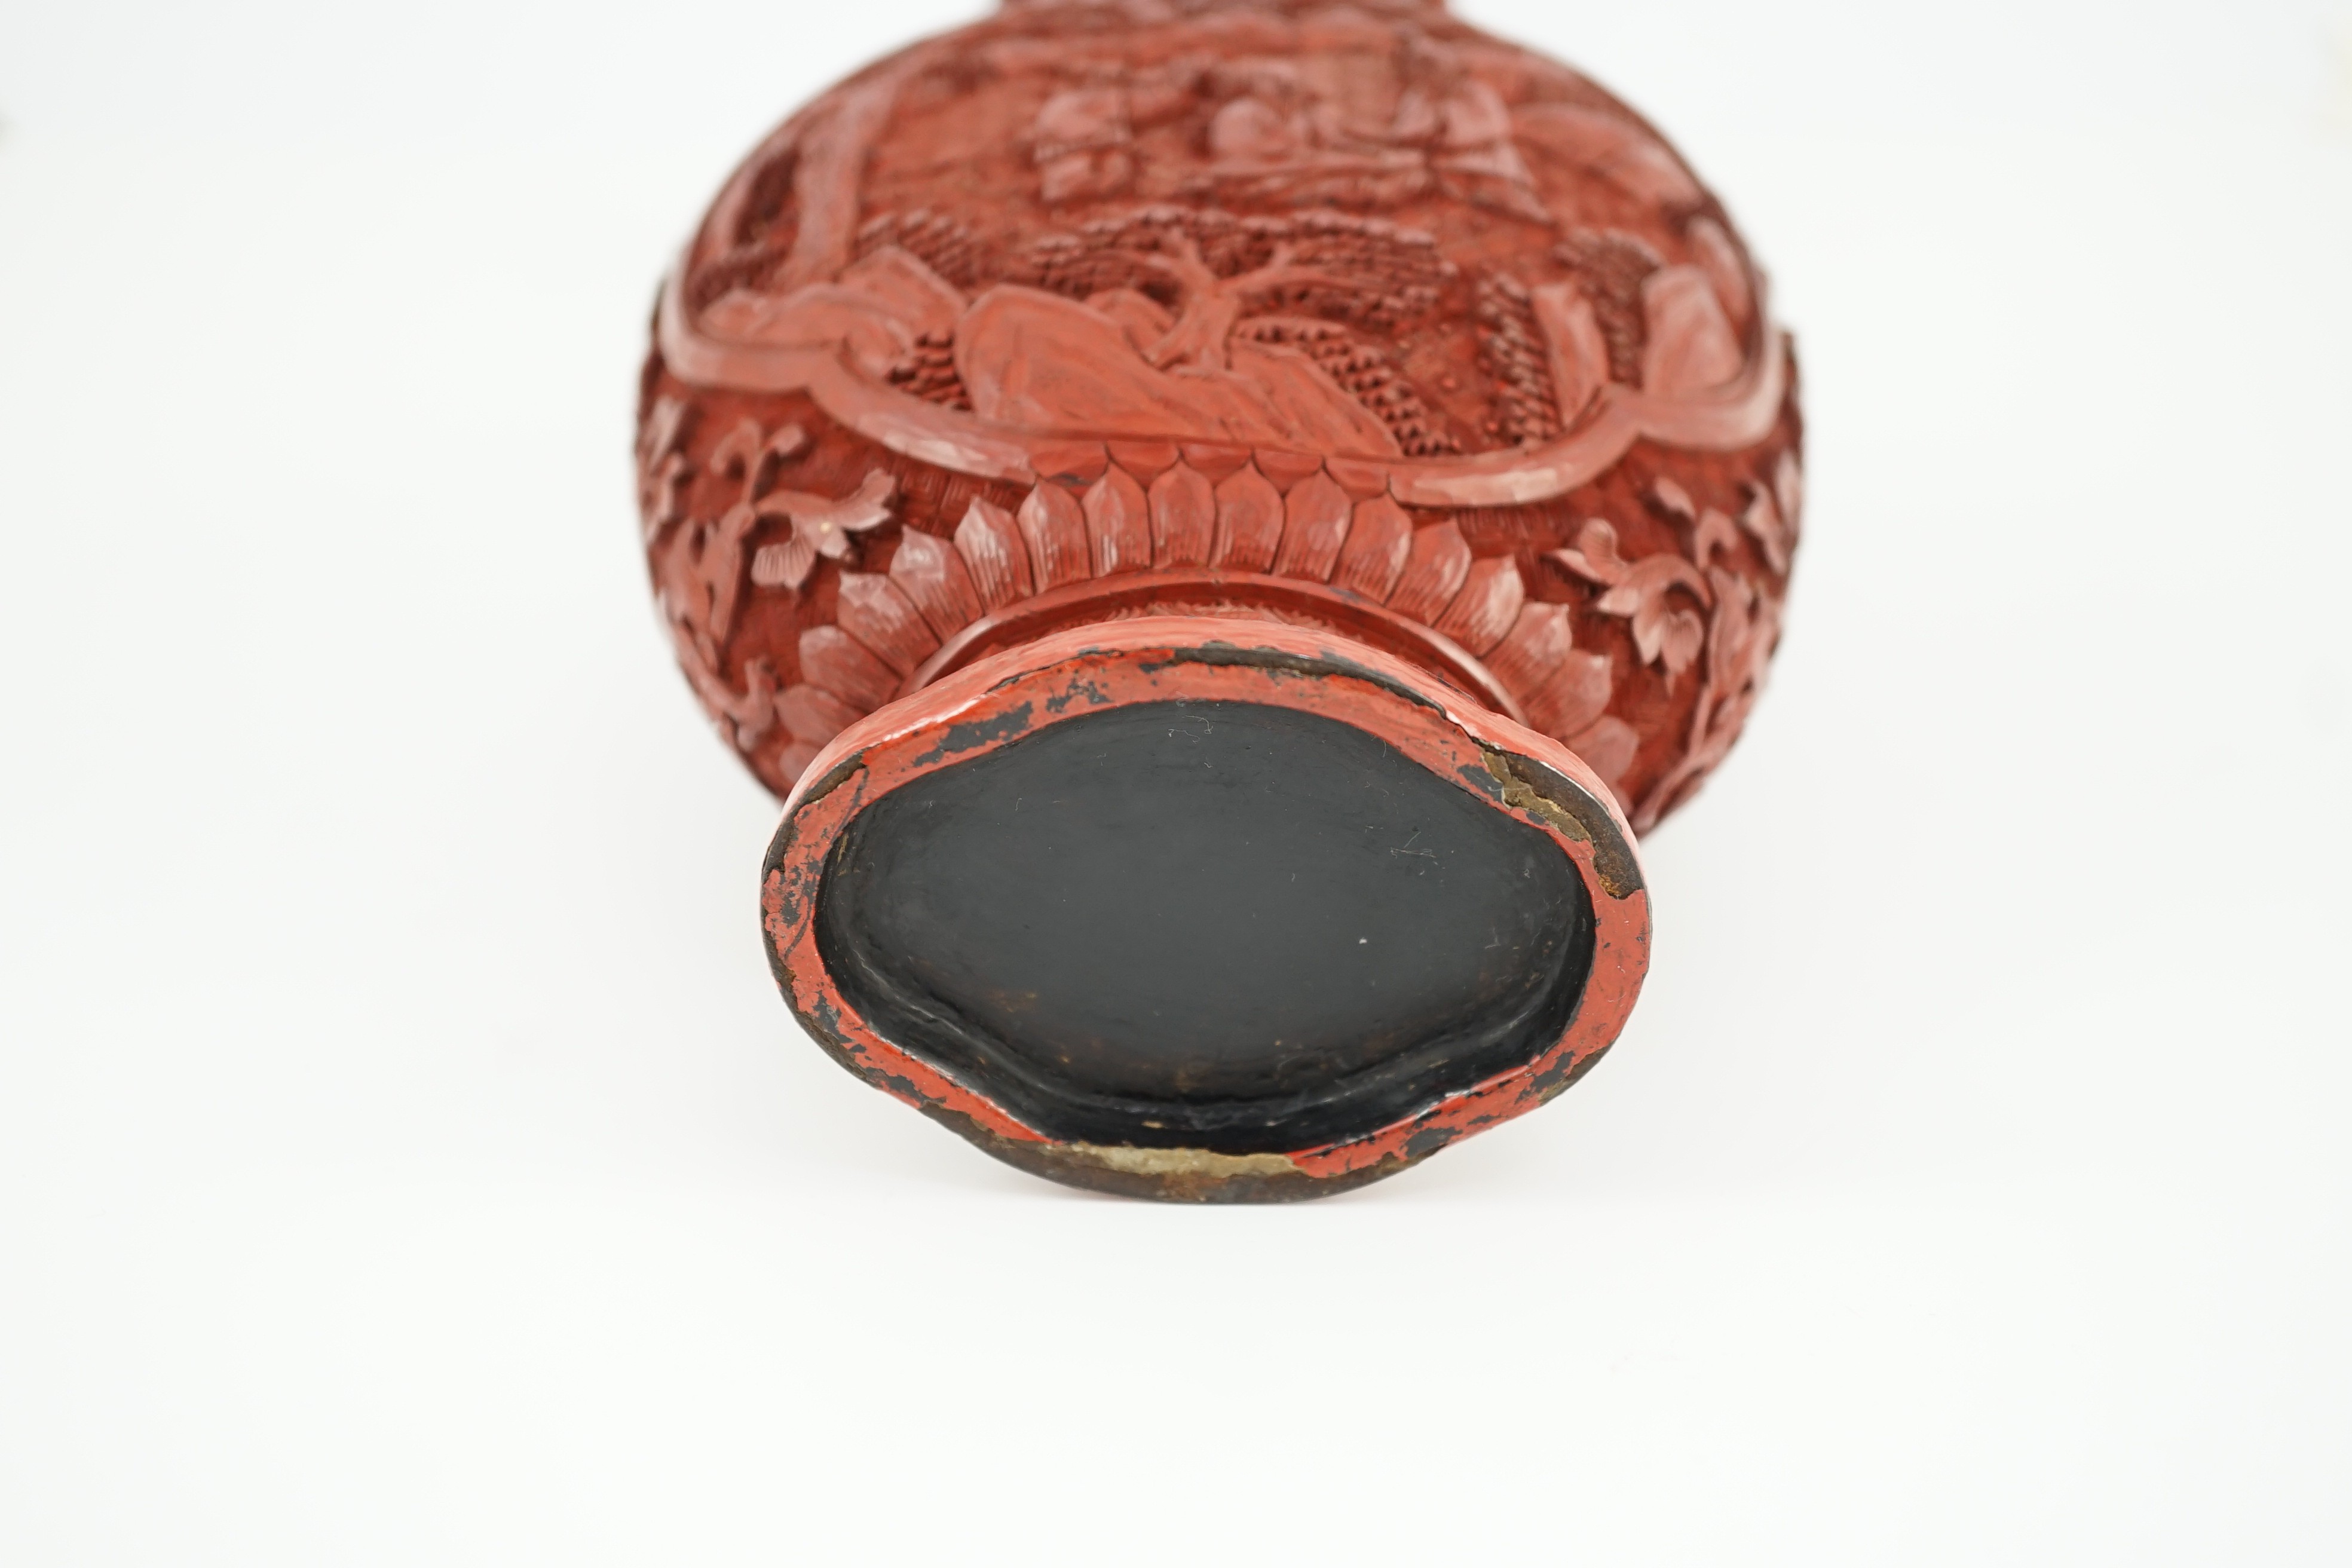 A Chinese cinnabar lacquer flattened baluster vase, 18th/19th century, 25cm high